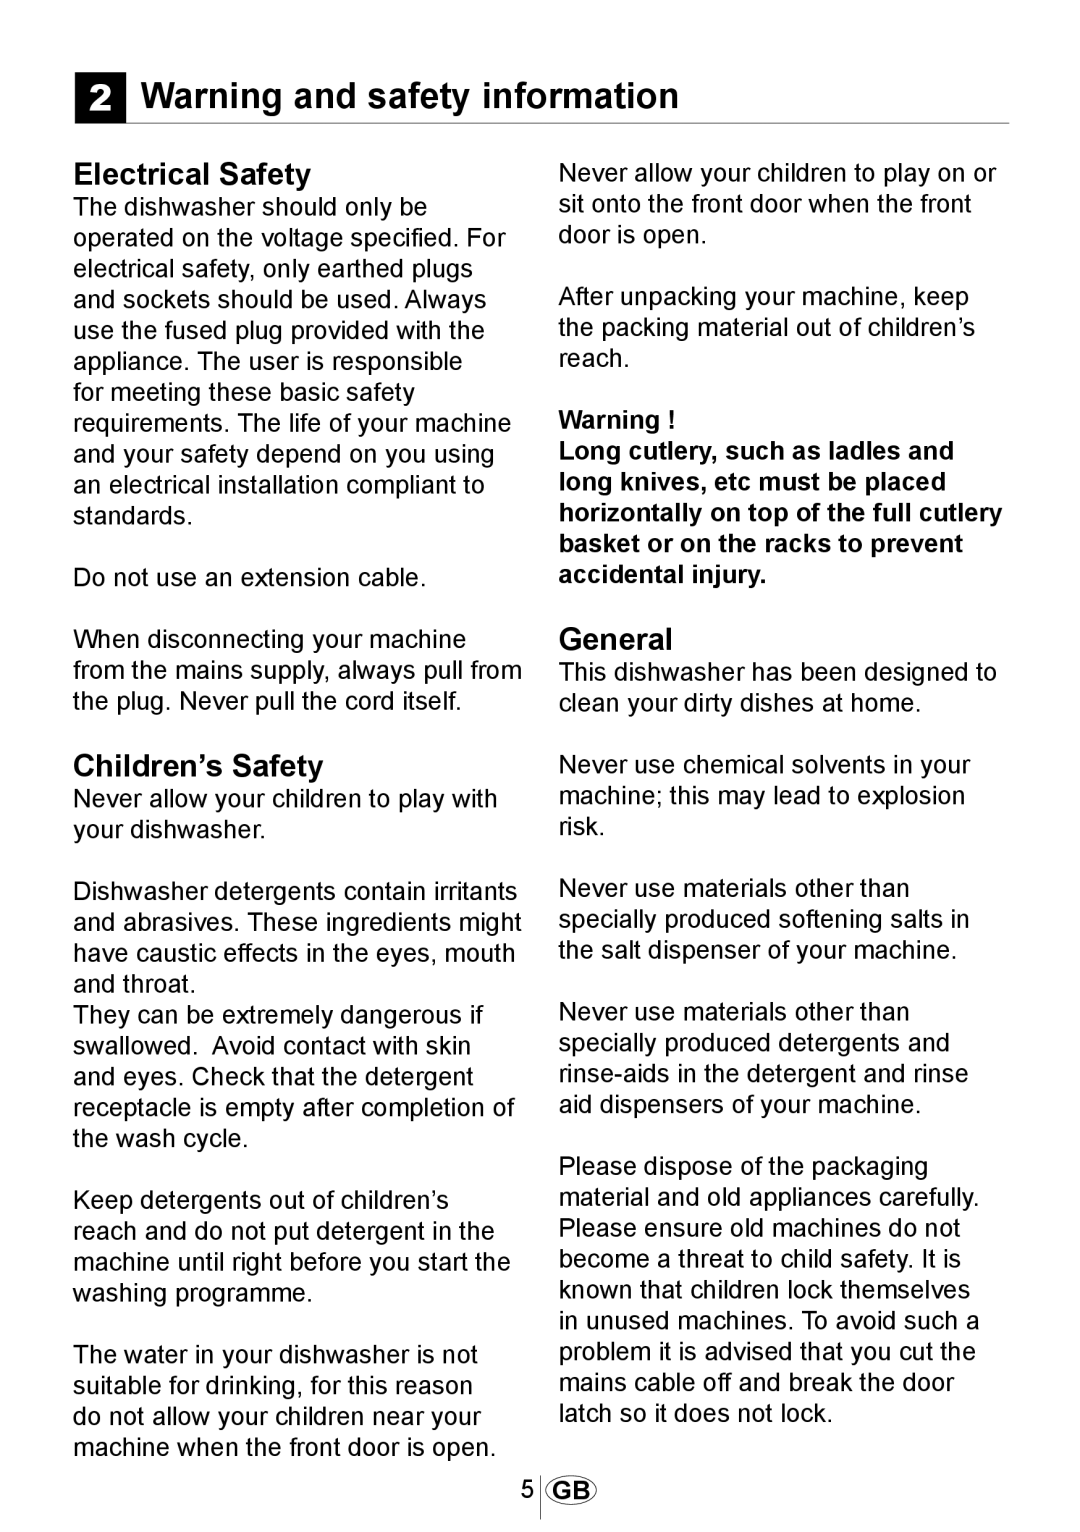 Beko DSFN 6830 manual Warning and safety information, Electrical Safety, Children’s Safety, General 